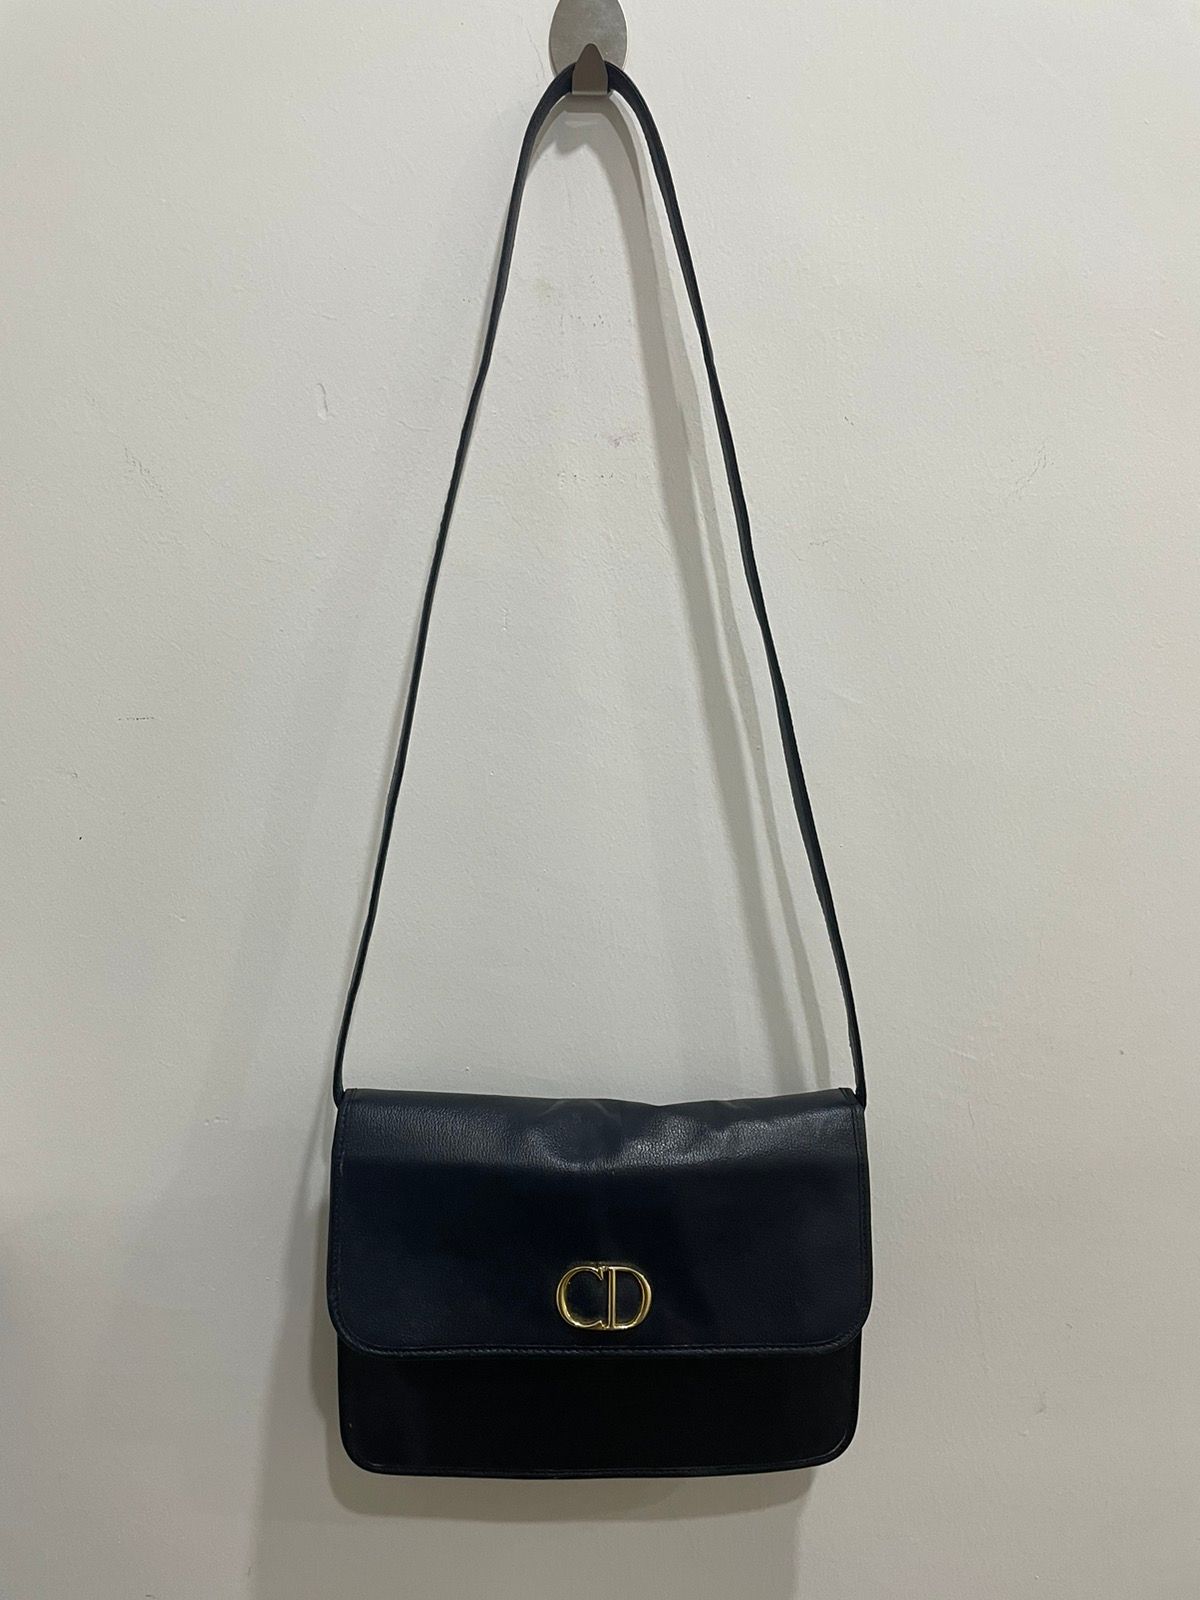 Authentic Vintage Christian Dior CD Fully Leather Sling Bag - 11